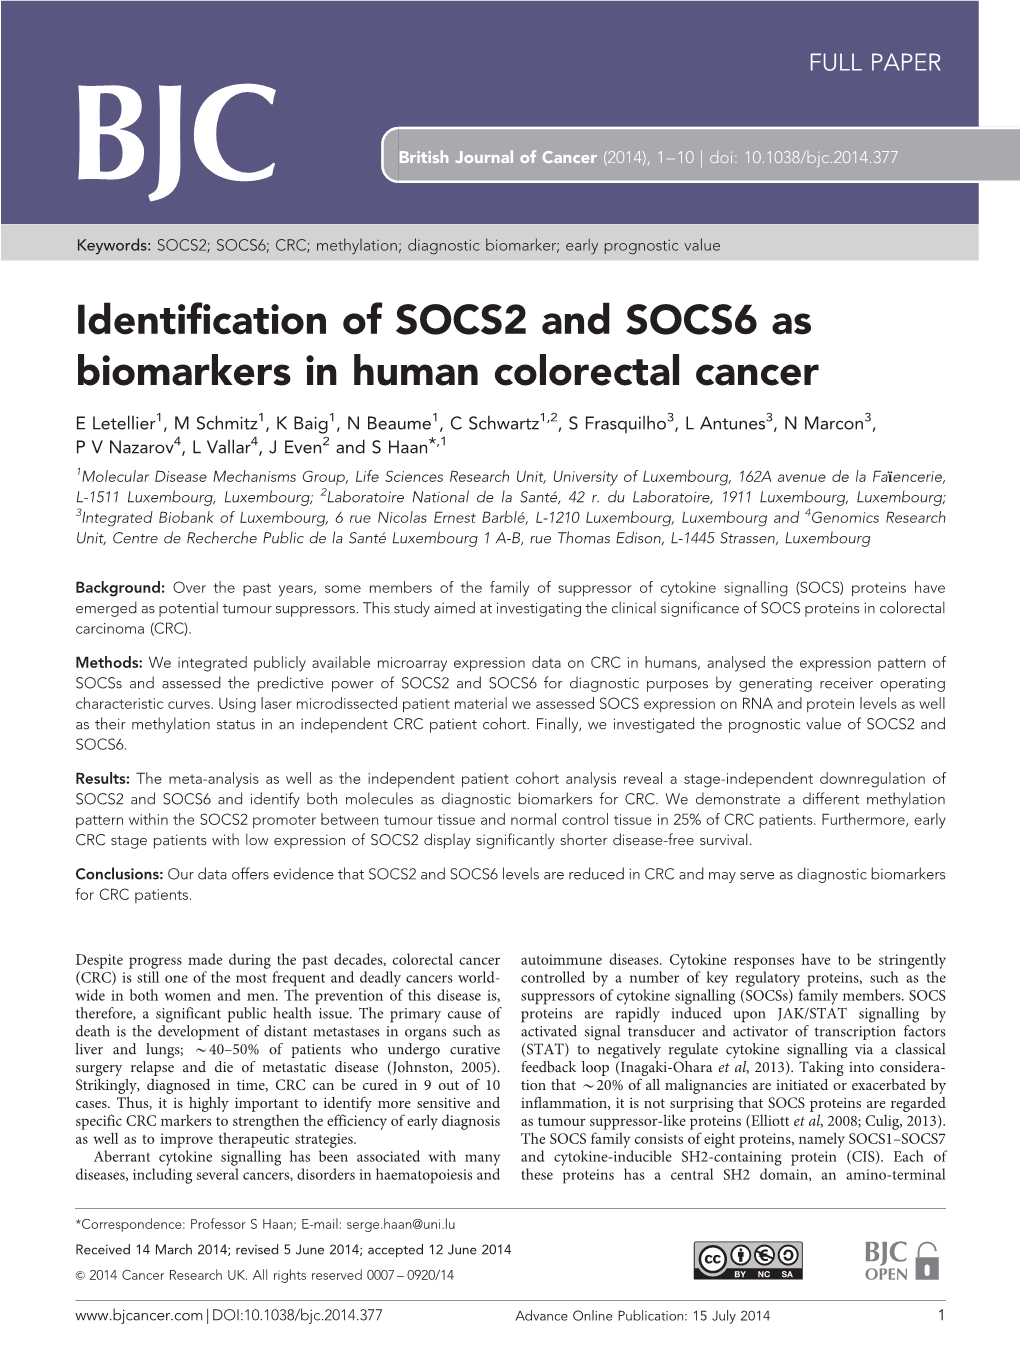 Identification of SOCS2 and SOCS6 As Biomarkers in Human Colorectal Cancer